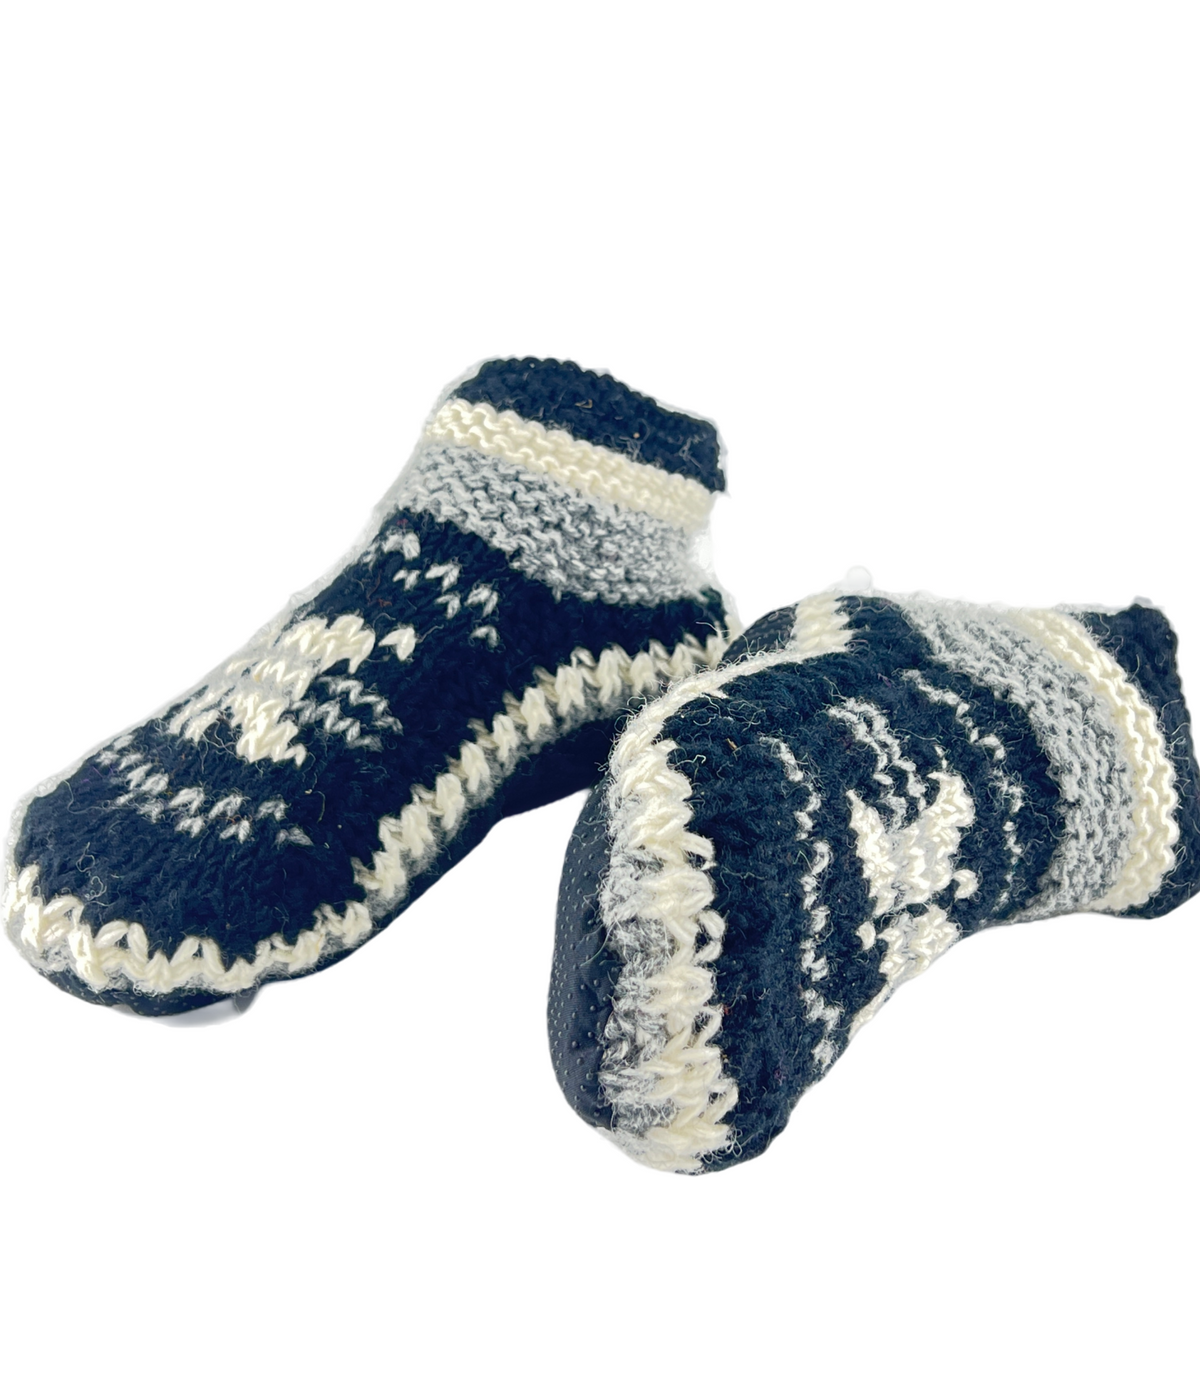 Adult booties |  Pure Wool Hand Knitted Socks with Non Slip Sole|  Cozy House Wear Ankle Slippers Socks | Fleece Lined Slipper boots